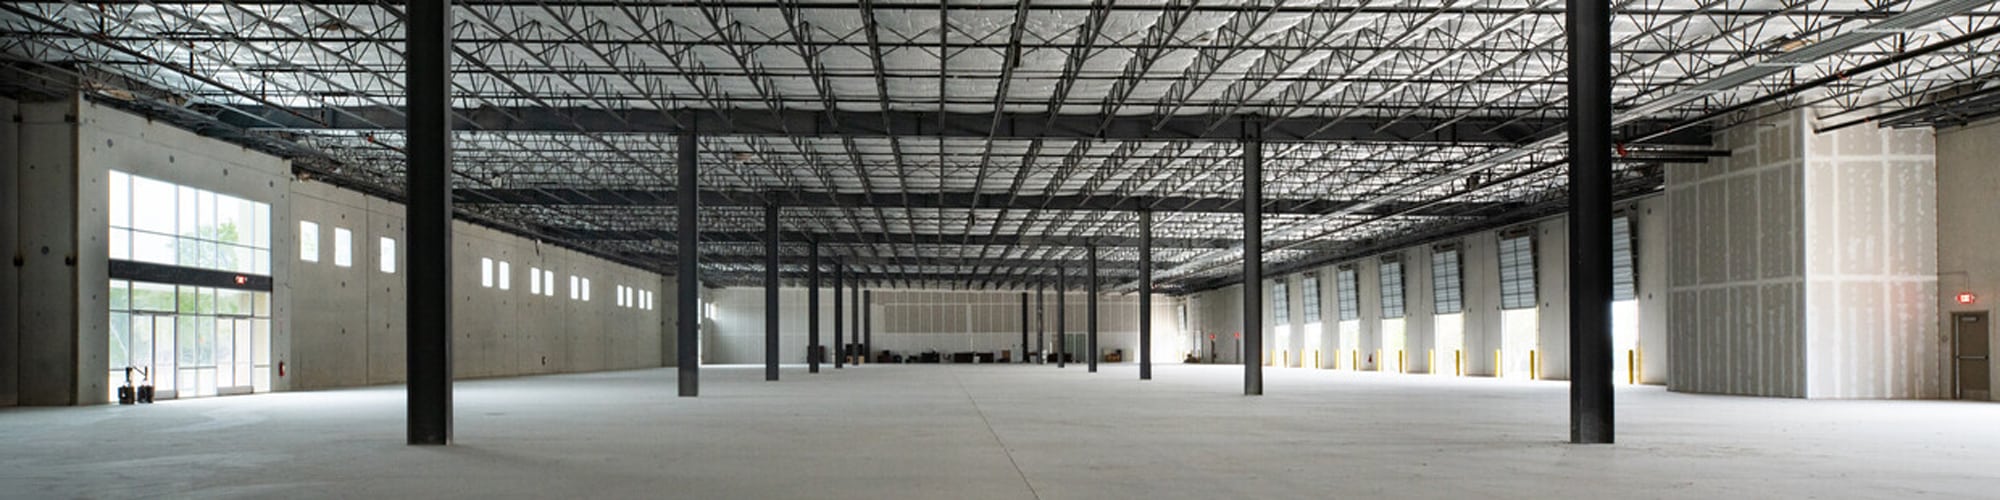 Brushy Creek Corporate Center - Building 1 - Available Warehouse Space